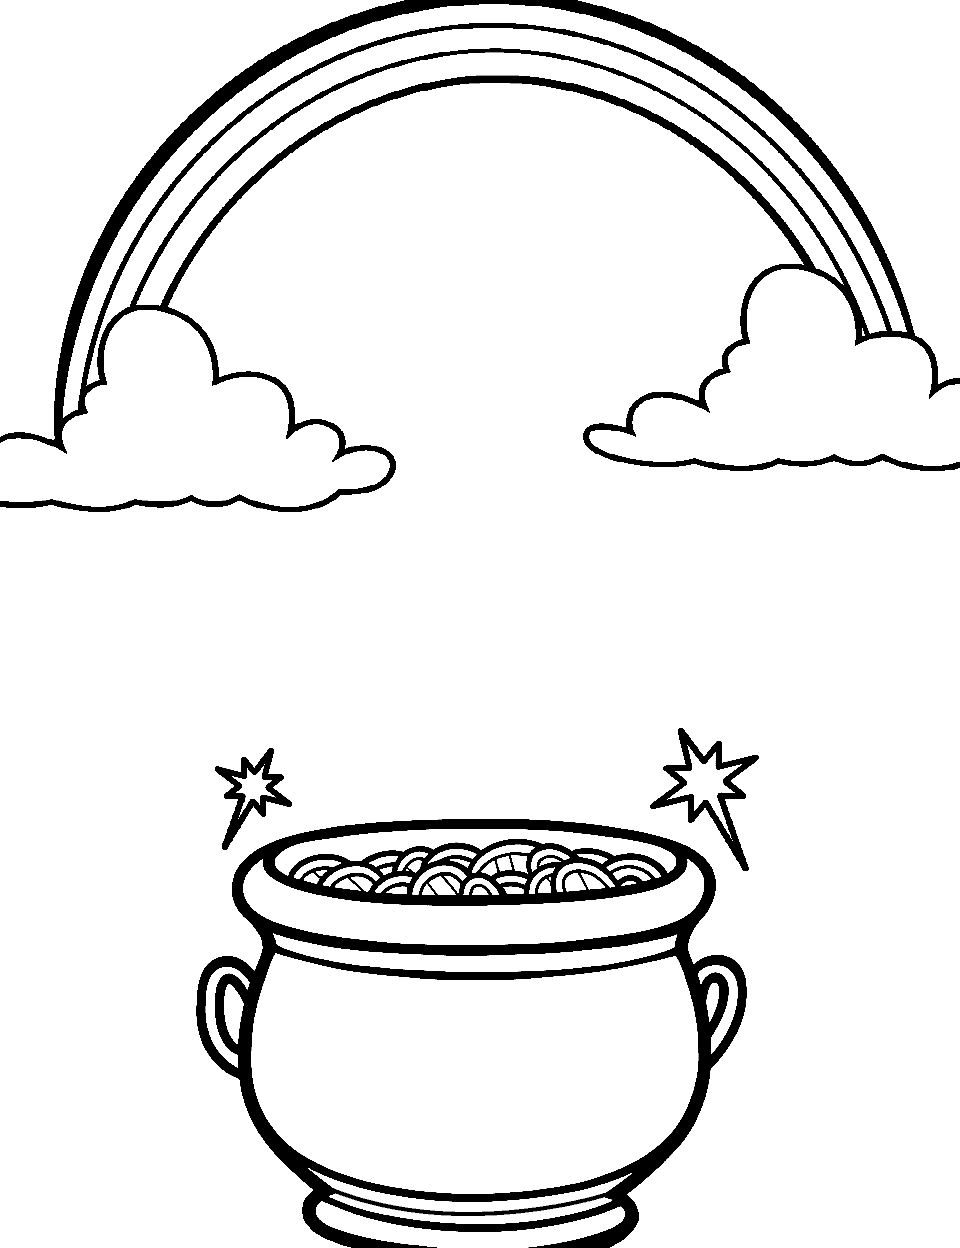 Pot under the Rainbow Coloring Page - A shimmering pot of gold under a vibrant rainbow.